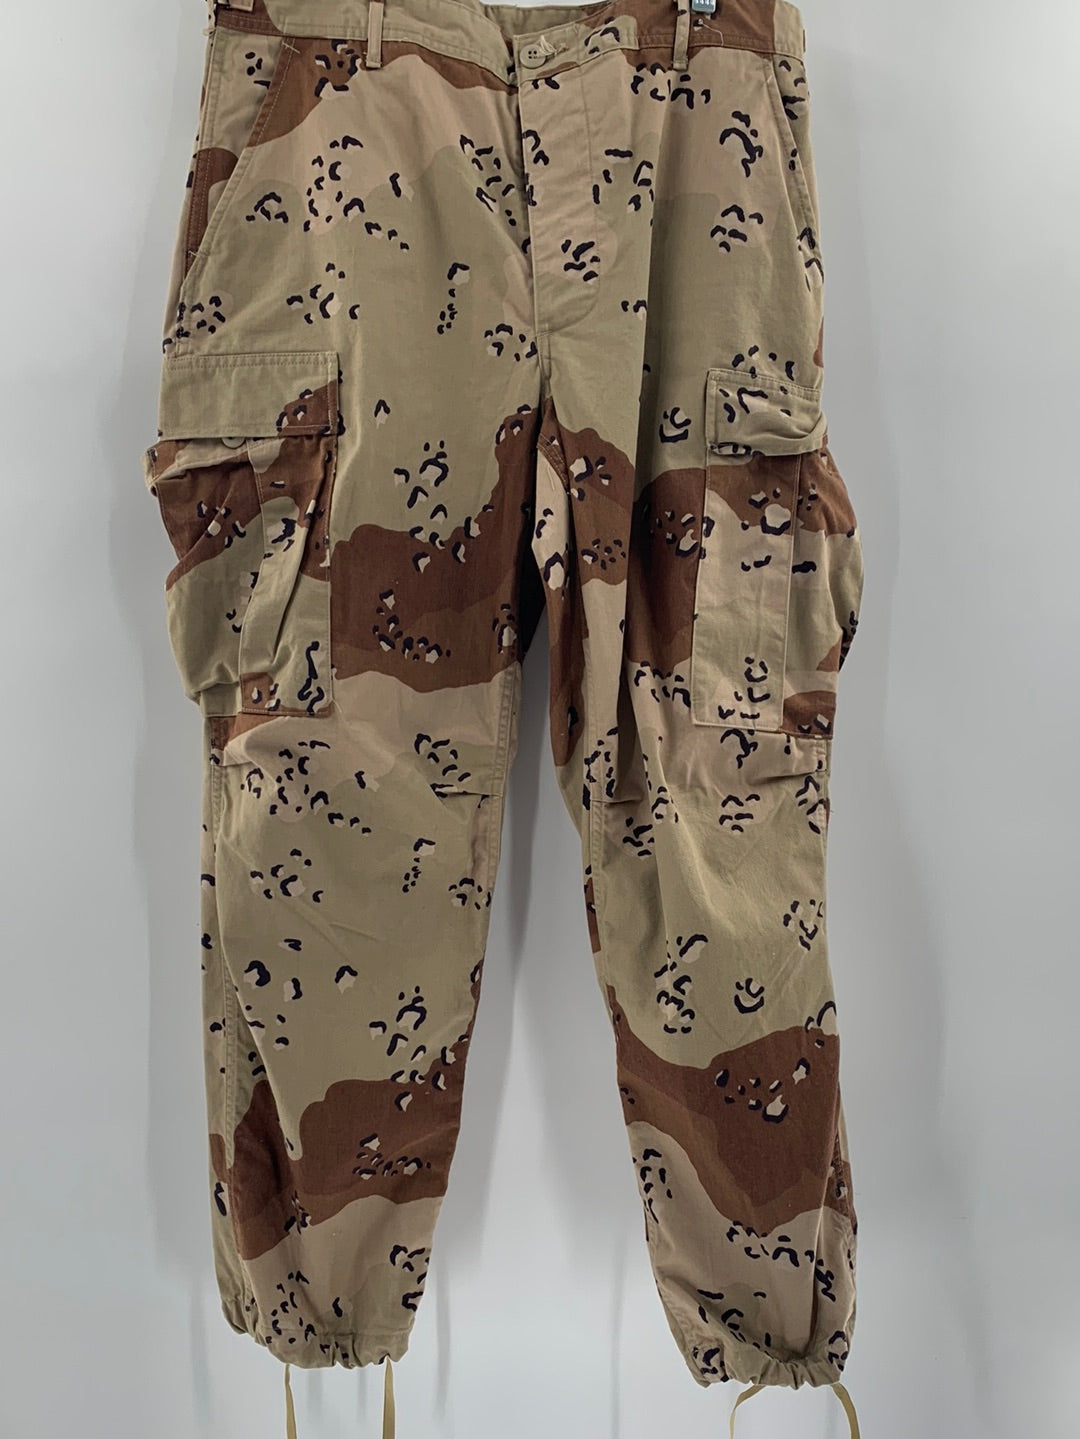 Urban Outfitters Army Surplus Cargo Trousers (Size Medium)